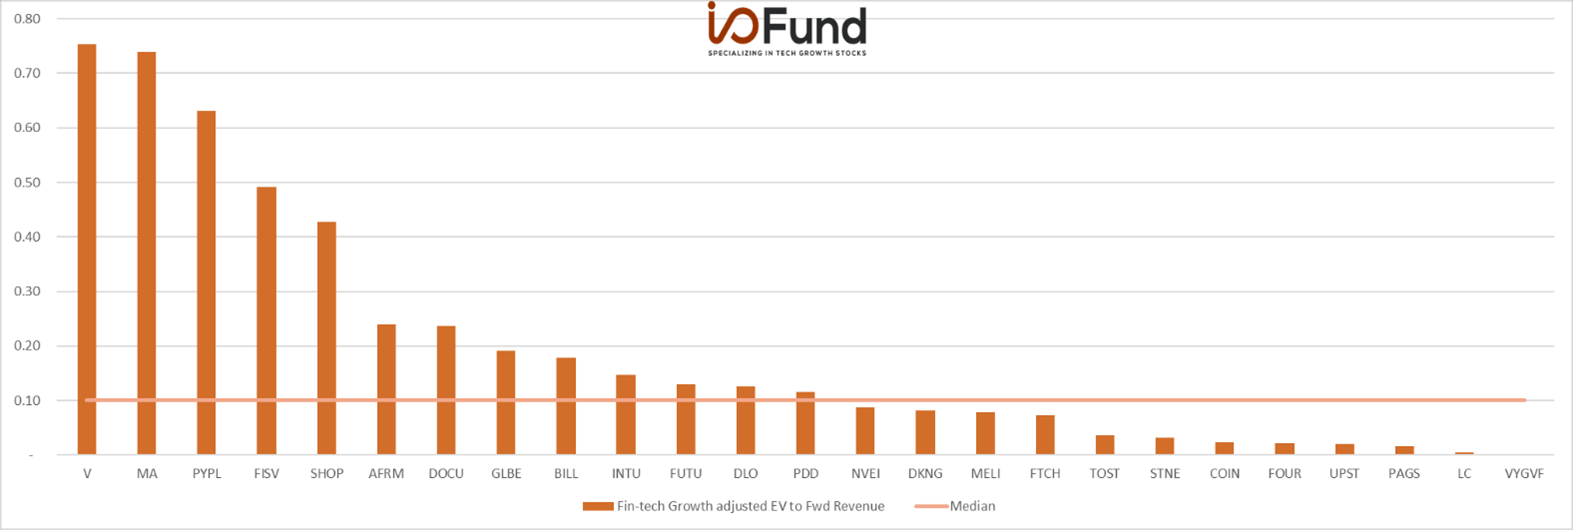 https://images.prismic.io/bethtechnology/c696af43-c108-4e37-96a5-4688a18cf087_io-fund-fintech-q4-2021-earnings-overview-growth-adjusted-ev-fwd-revenue.png?auto=compress,format